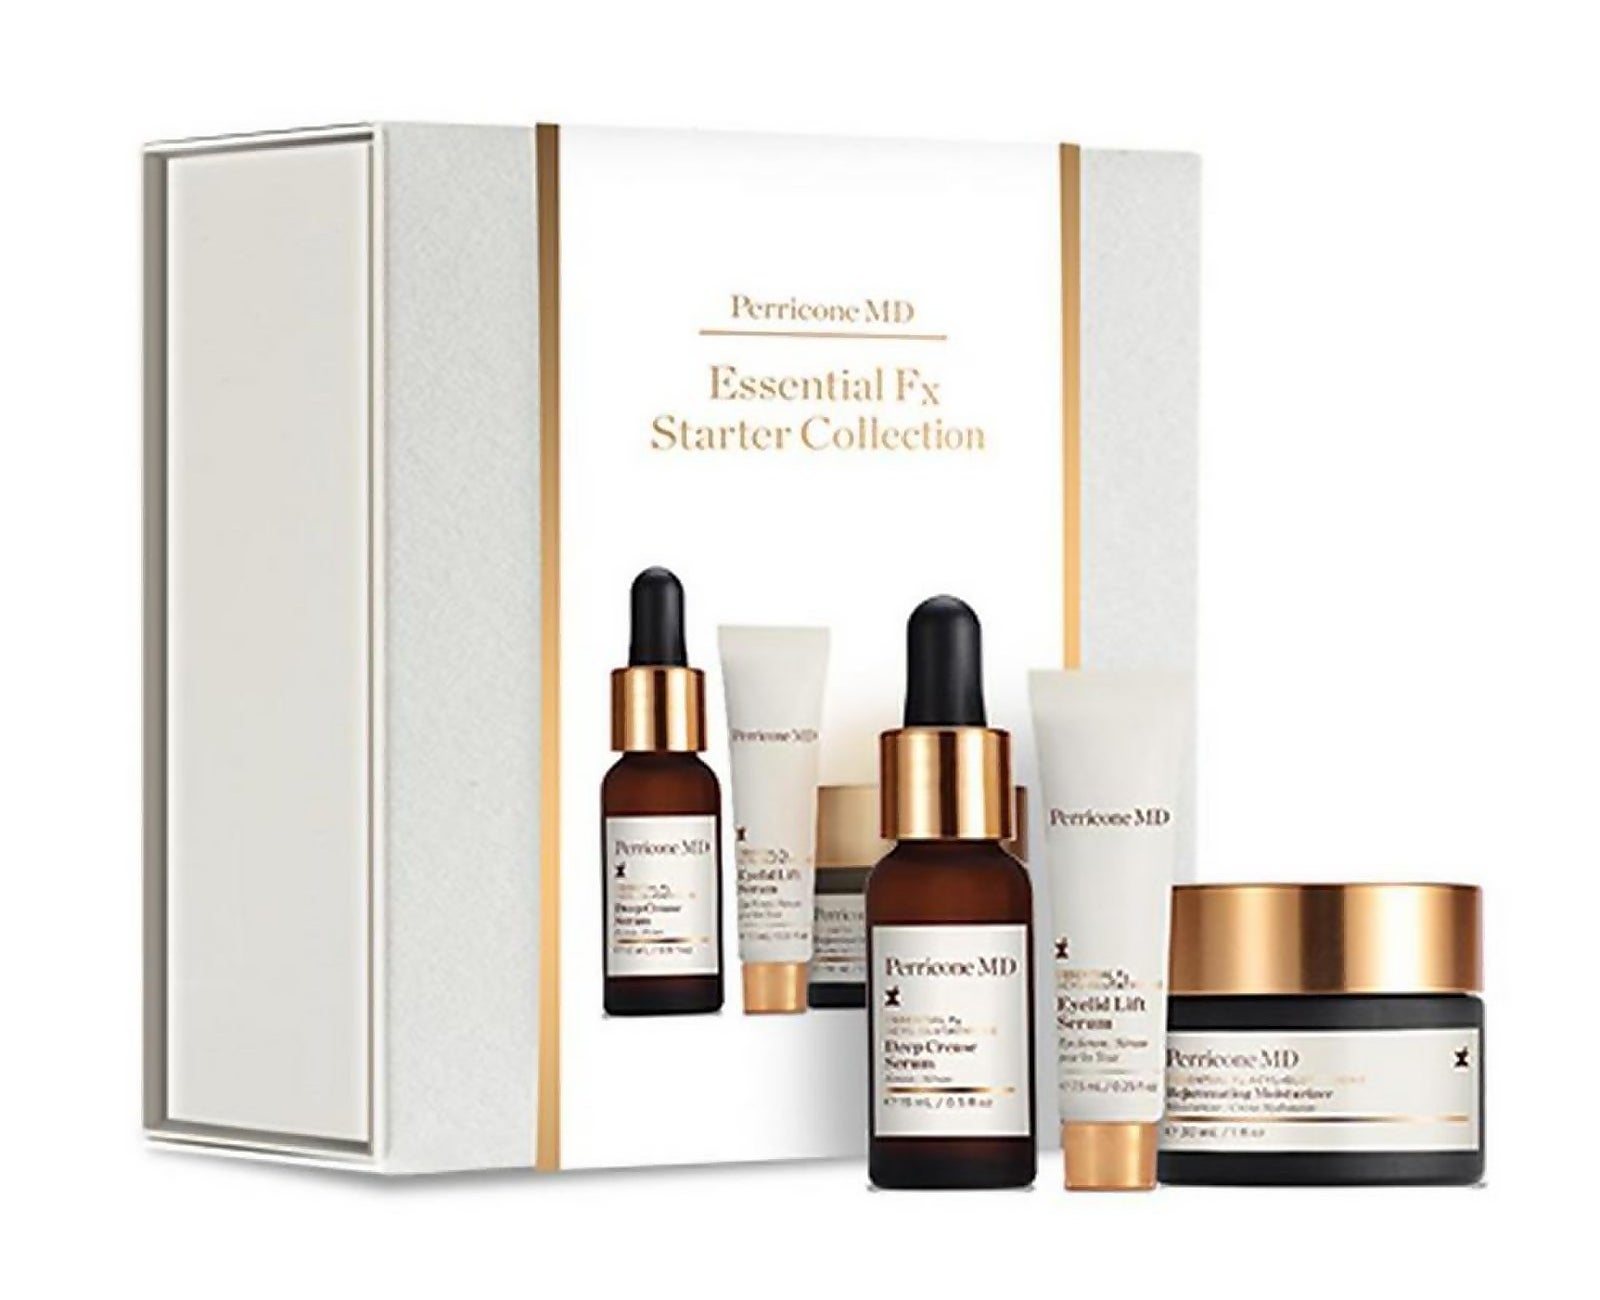 Perricone MD starter set with bottles of serum, eye cream and mositurizer.